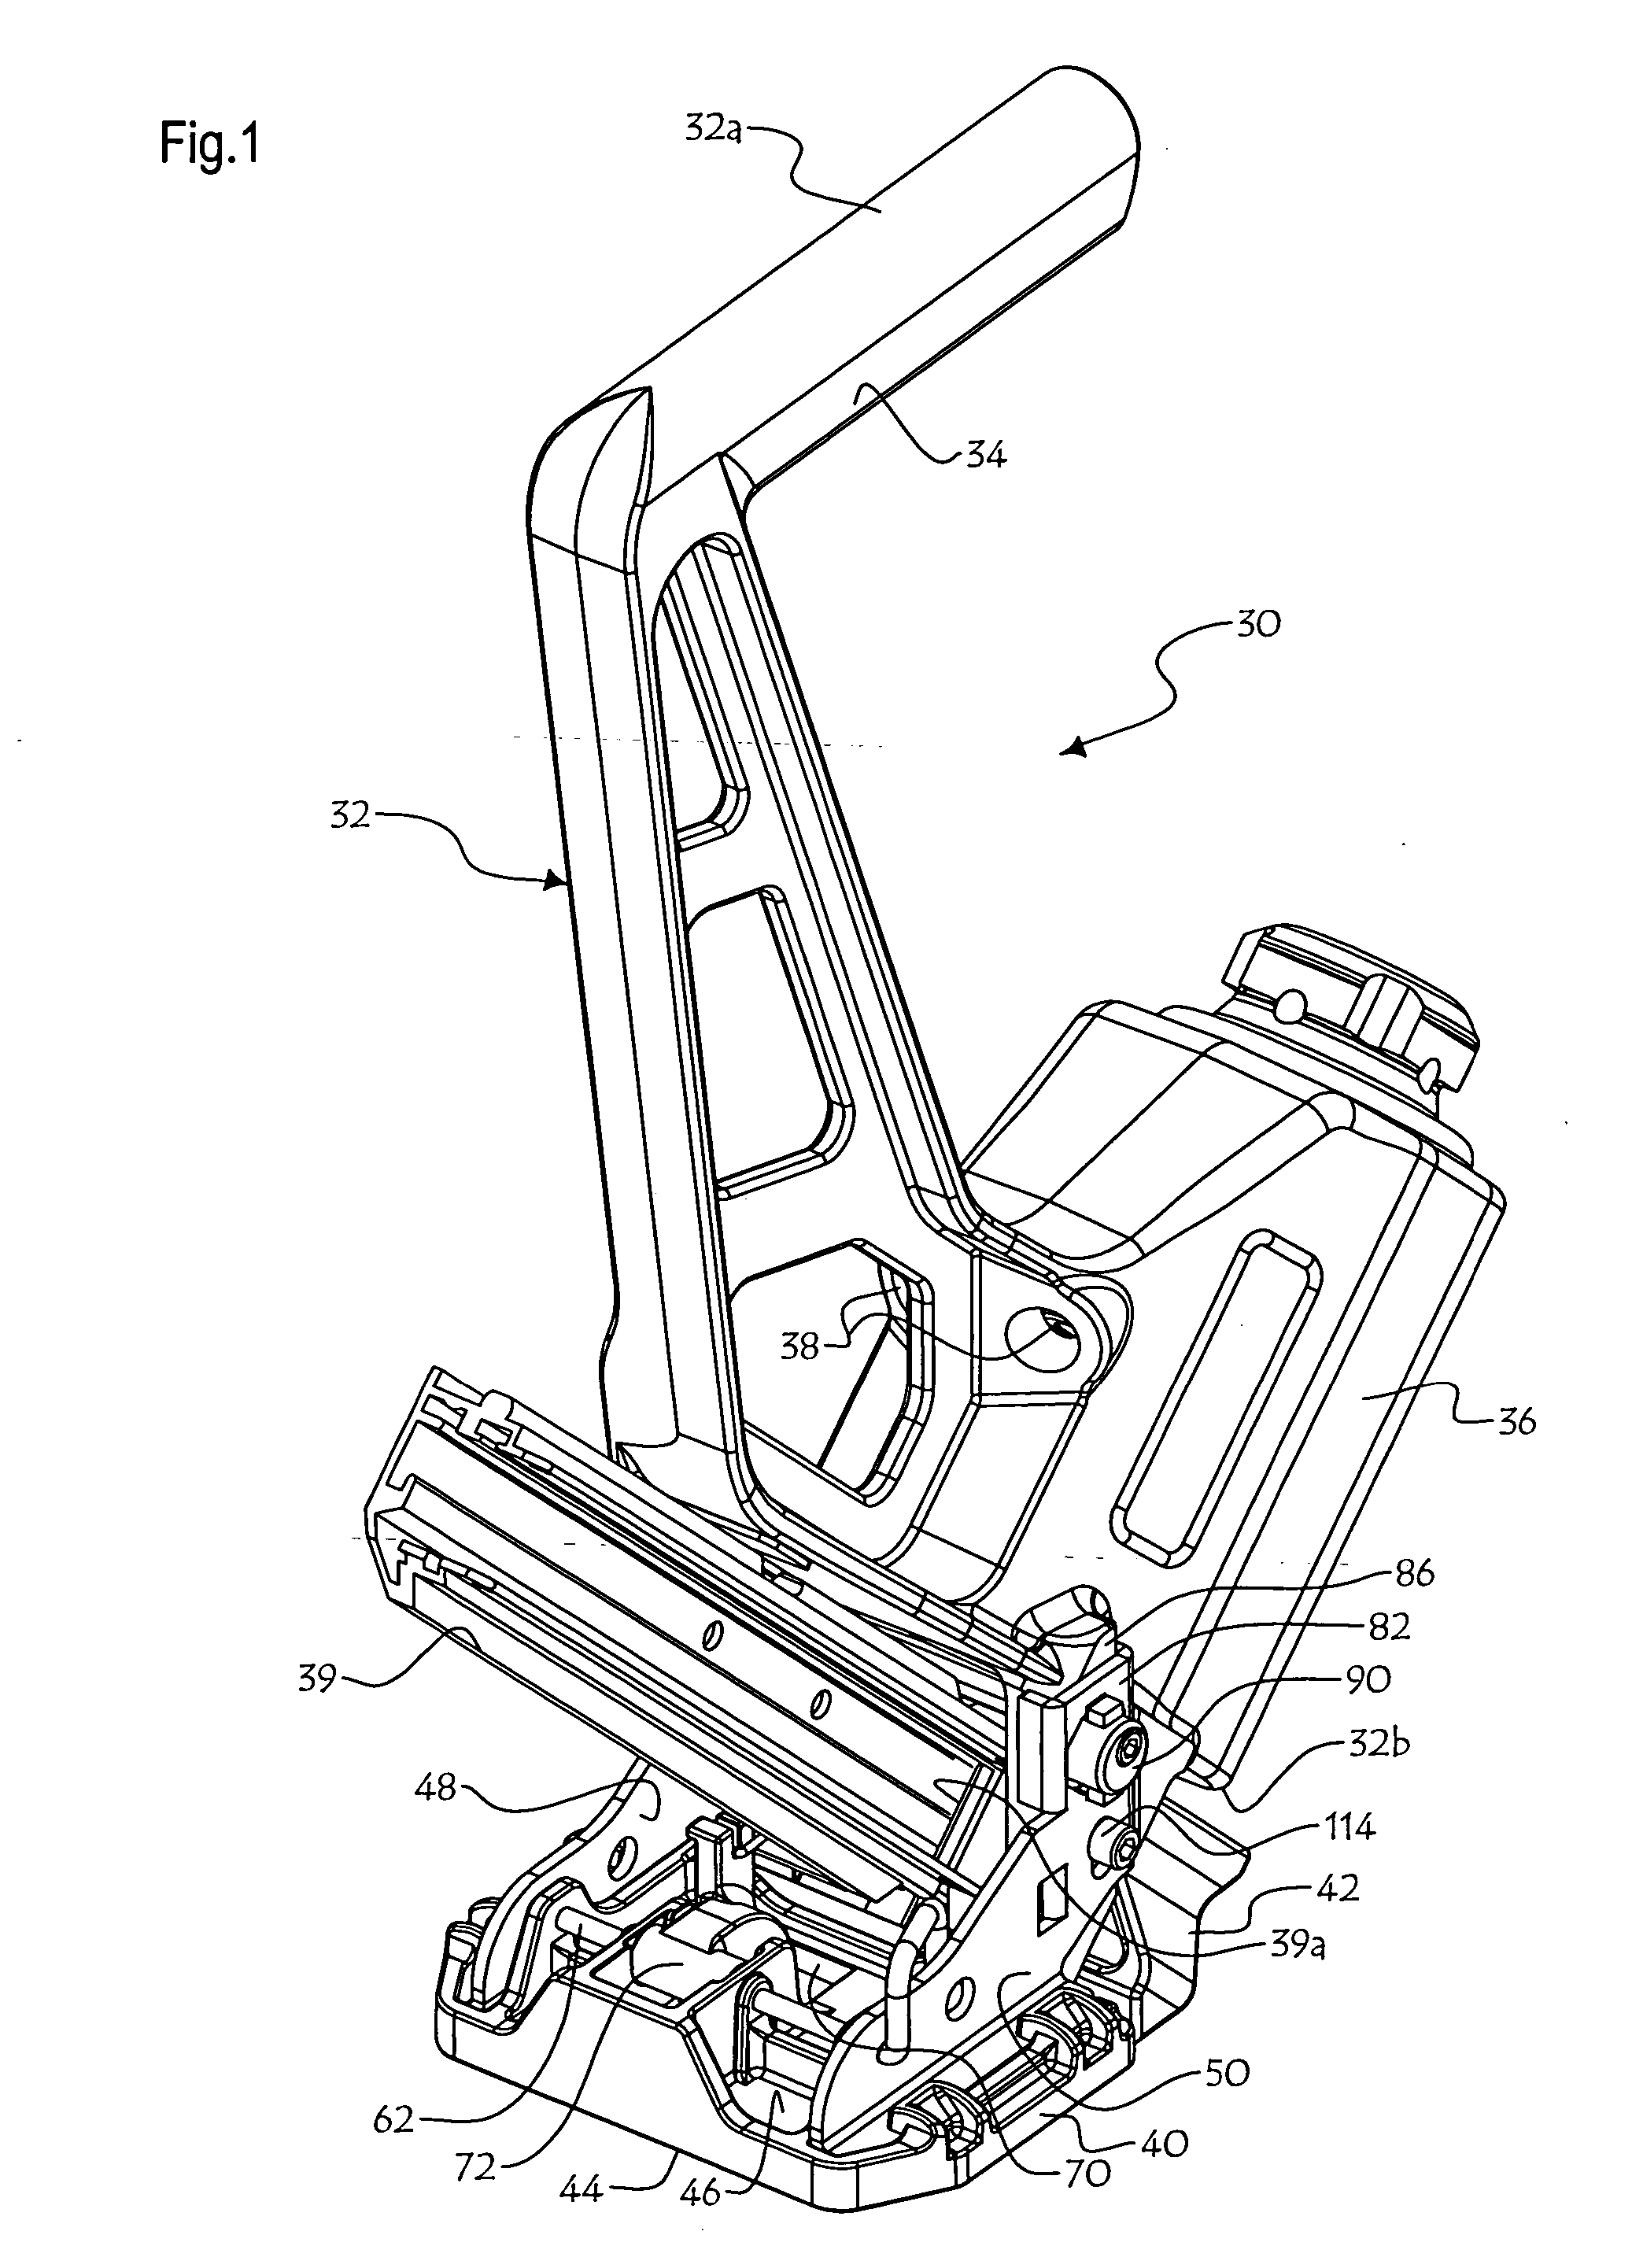 Nailer with adjustable guide member